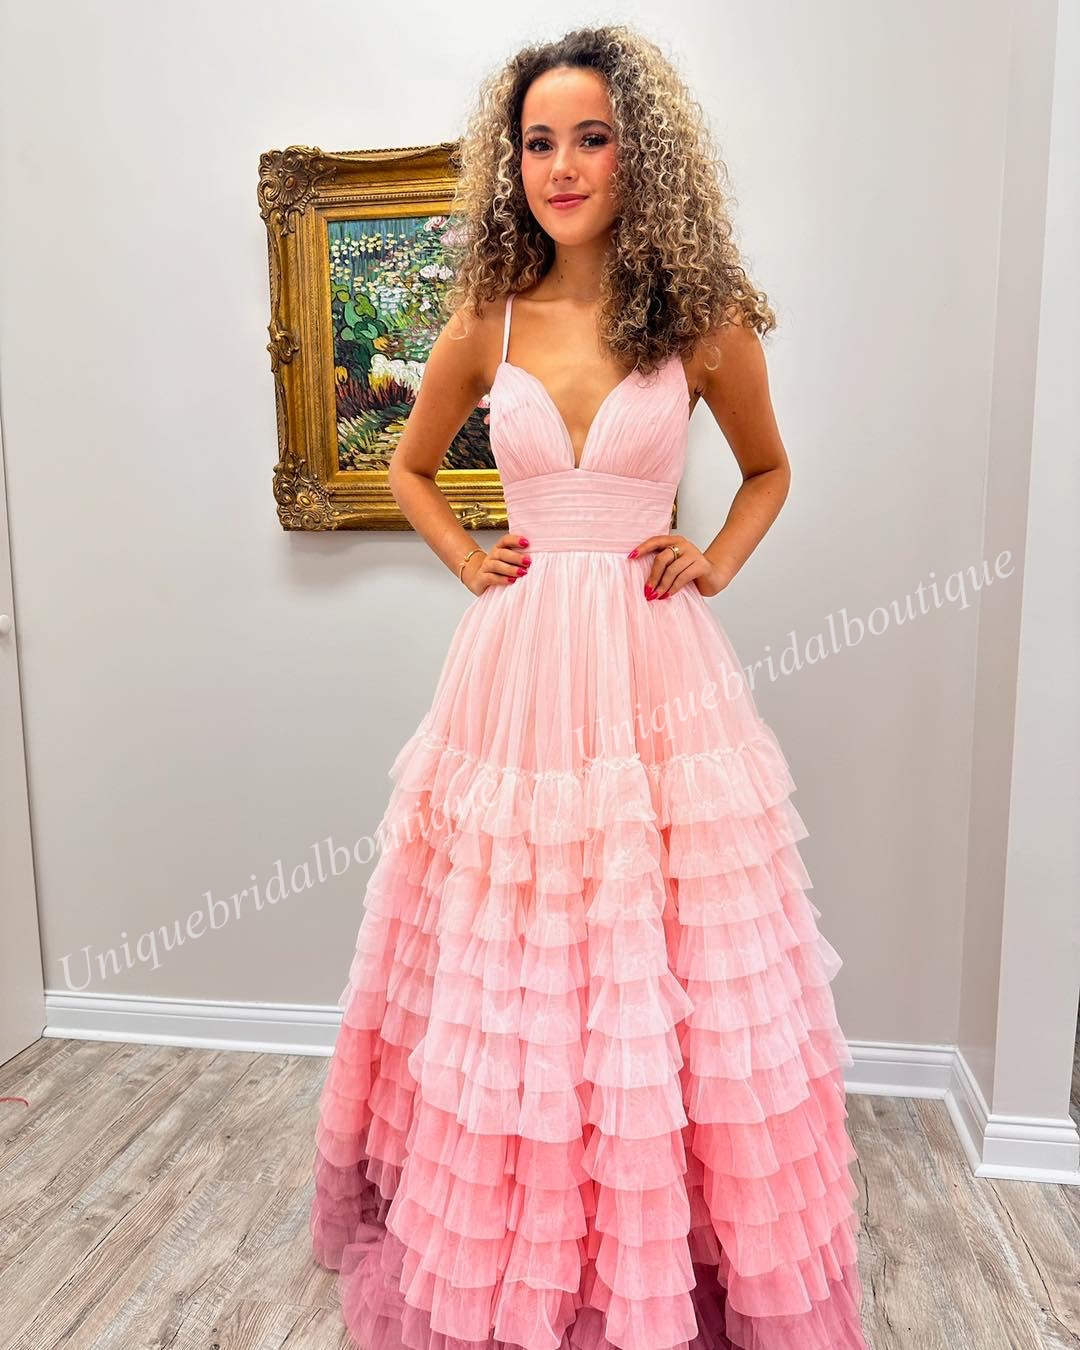 Ruffle Ombre Prom Dress Layer Blush Light Blue Purple Lady Preteen Pageant Gown Formal Evening Cocktail Party Wedding Guest Red Capet Runway Gala Black-Tie High Slit